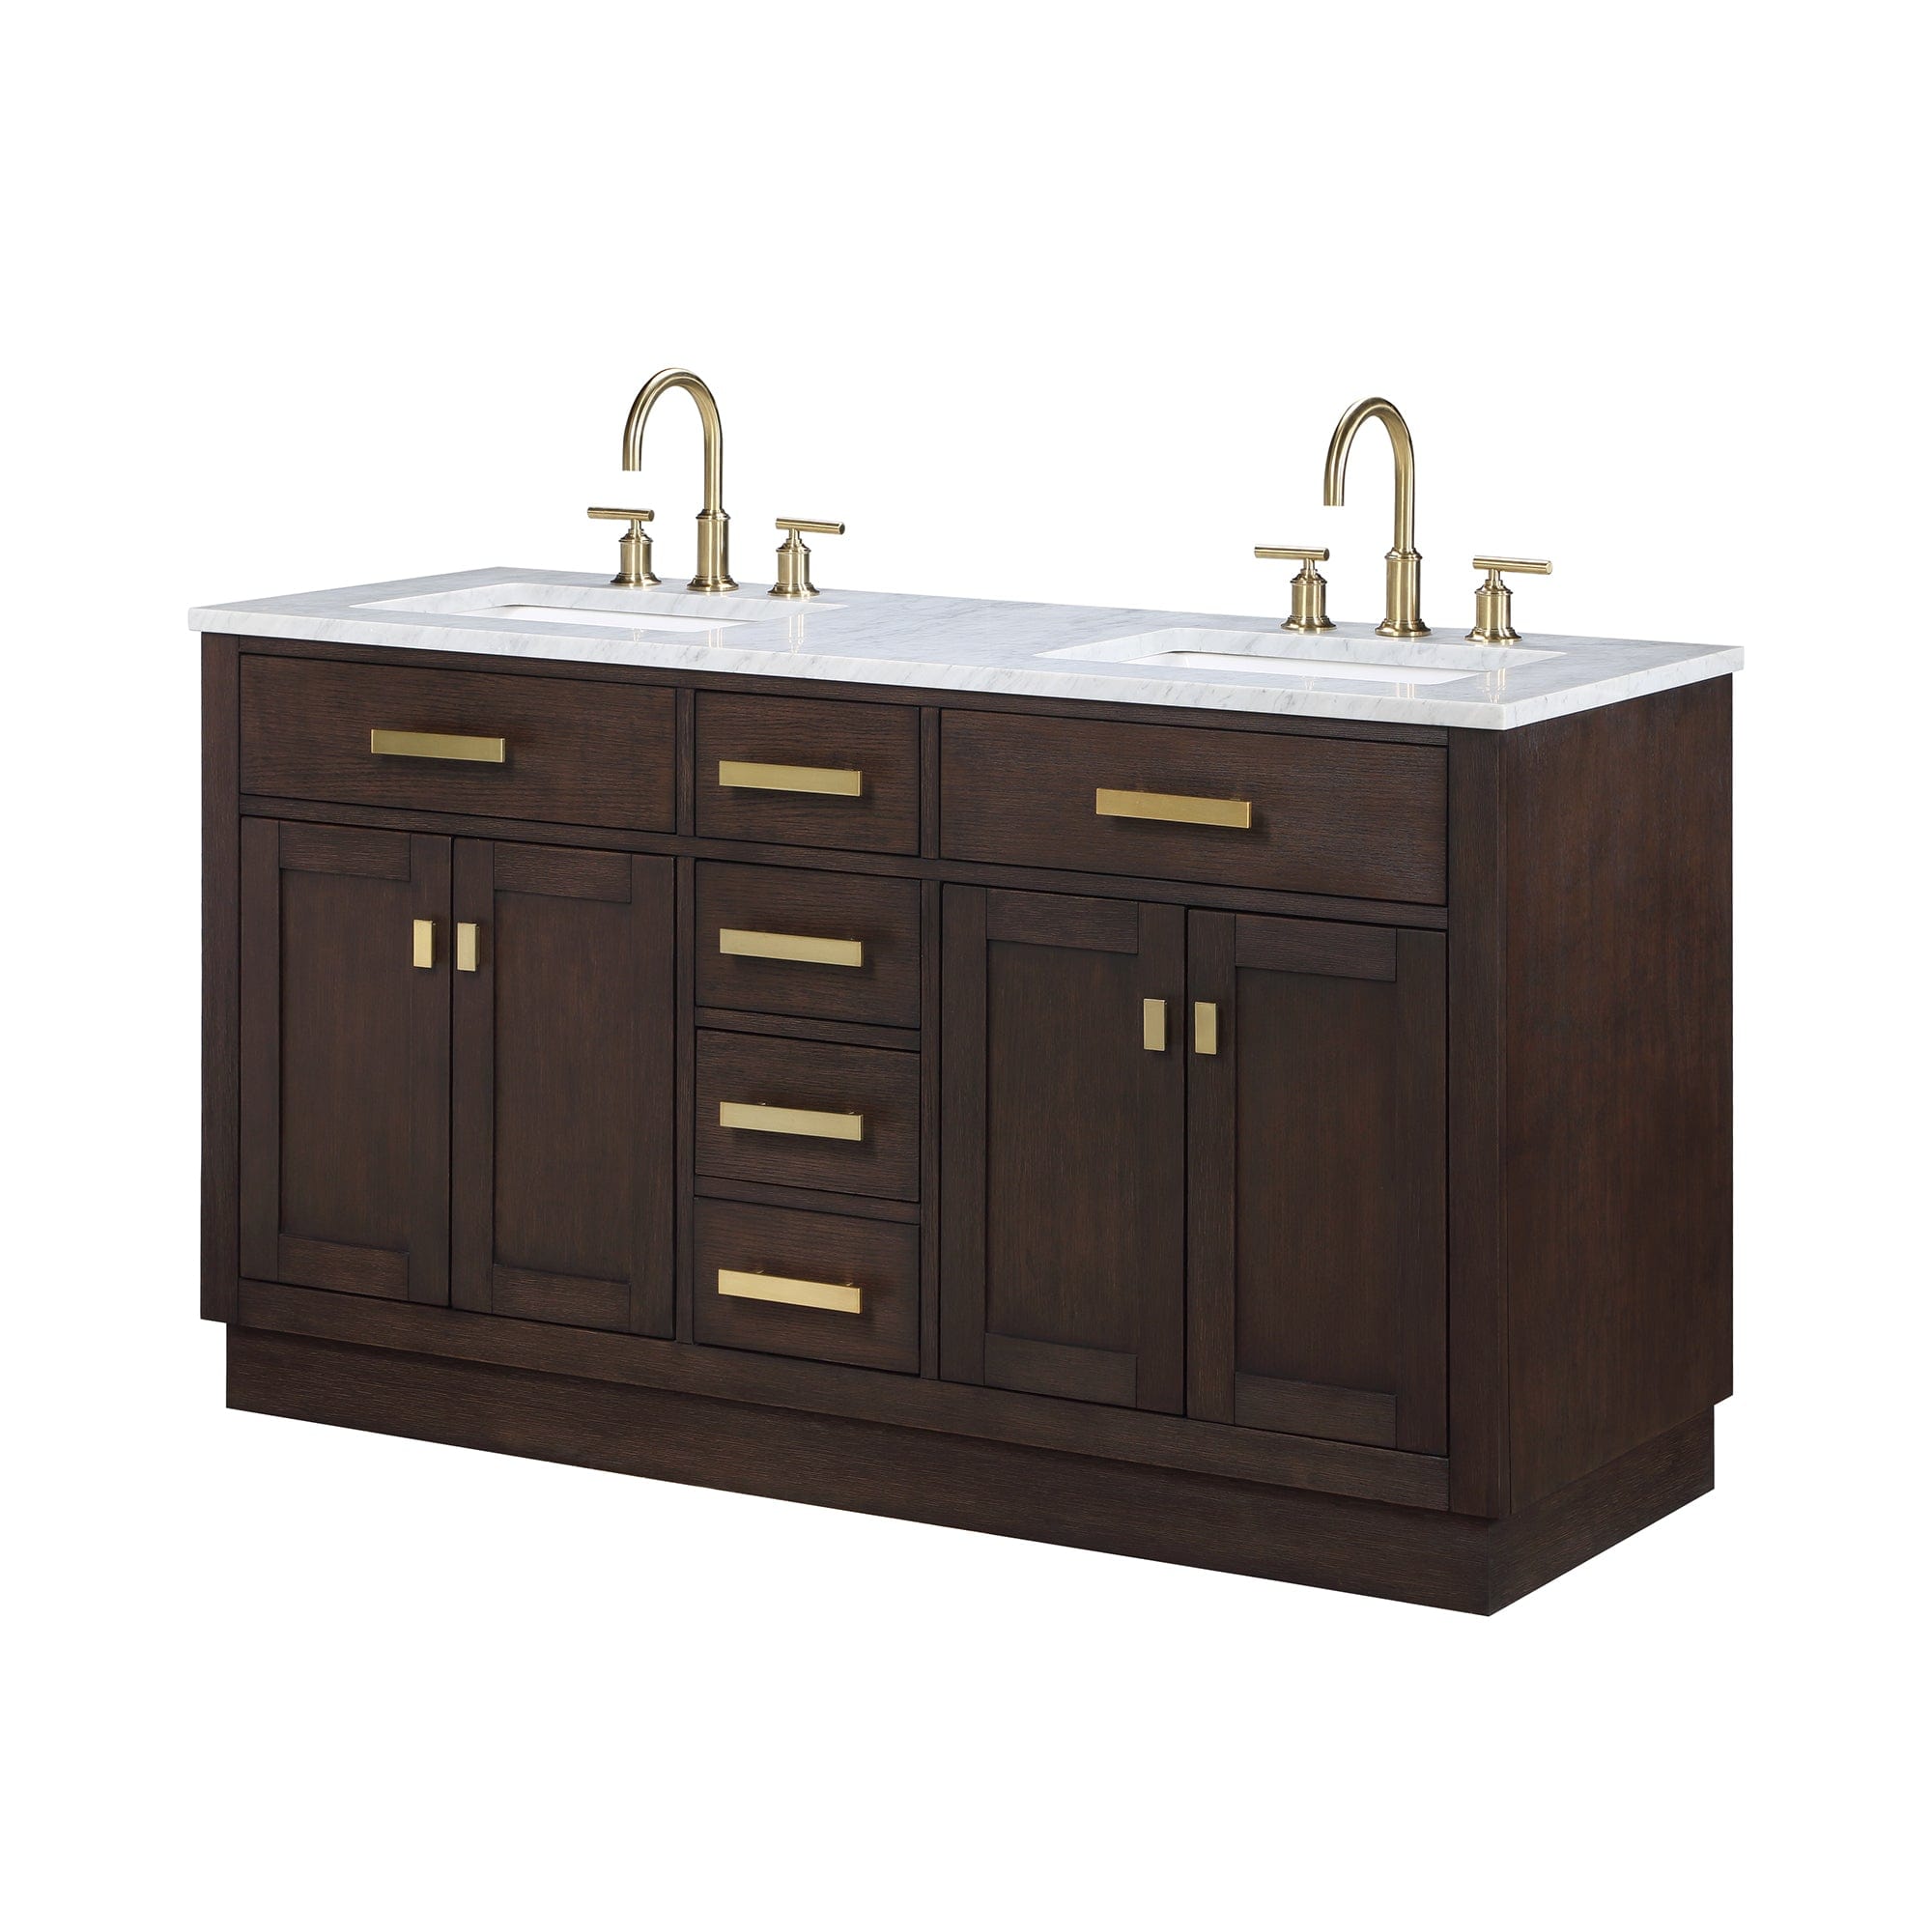 Chestnut 60 In. Double Sink Carrara White Marble Countertop Vanity In Brown Oak with Mirrors - Molaix732030764804CH60CW06BK-R21000000